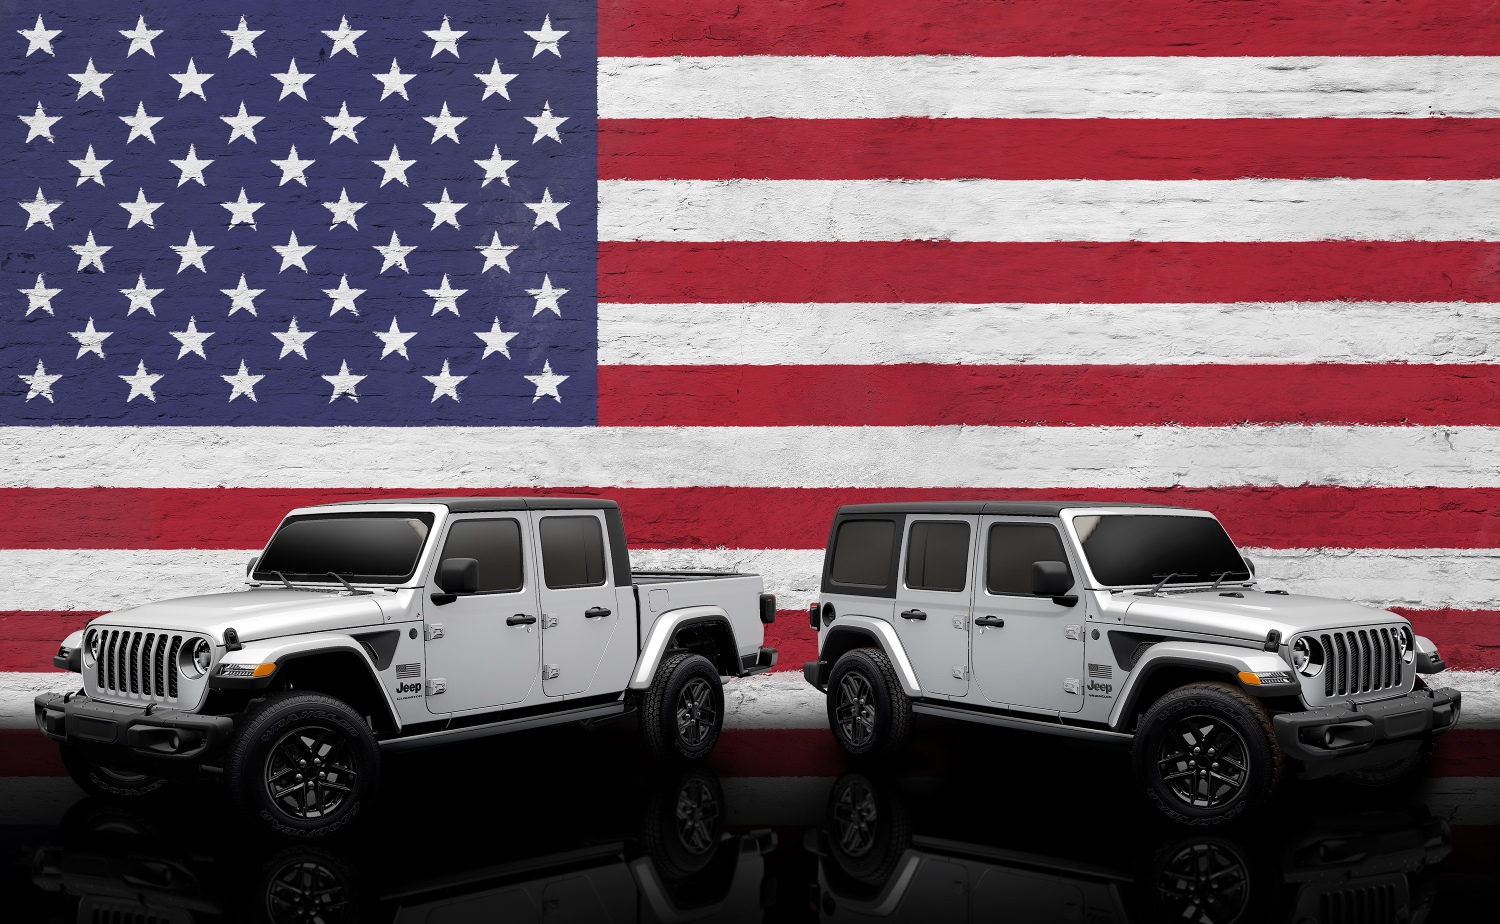 The Jeep Wrangler and Jeep Gladiator photographed here